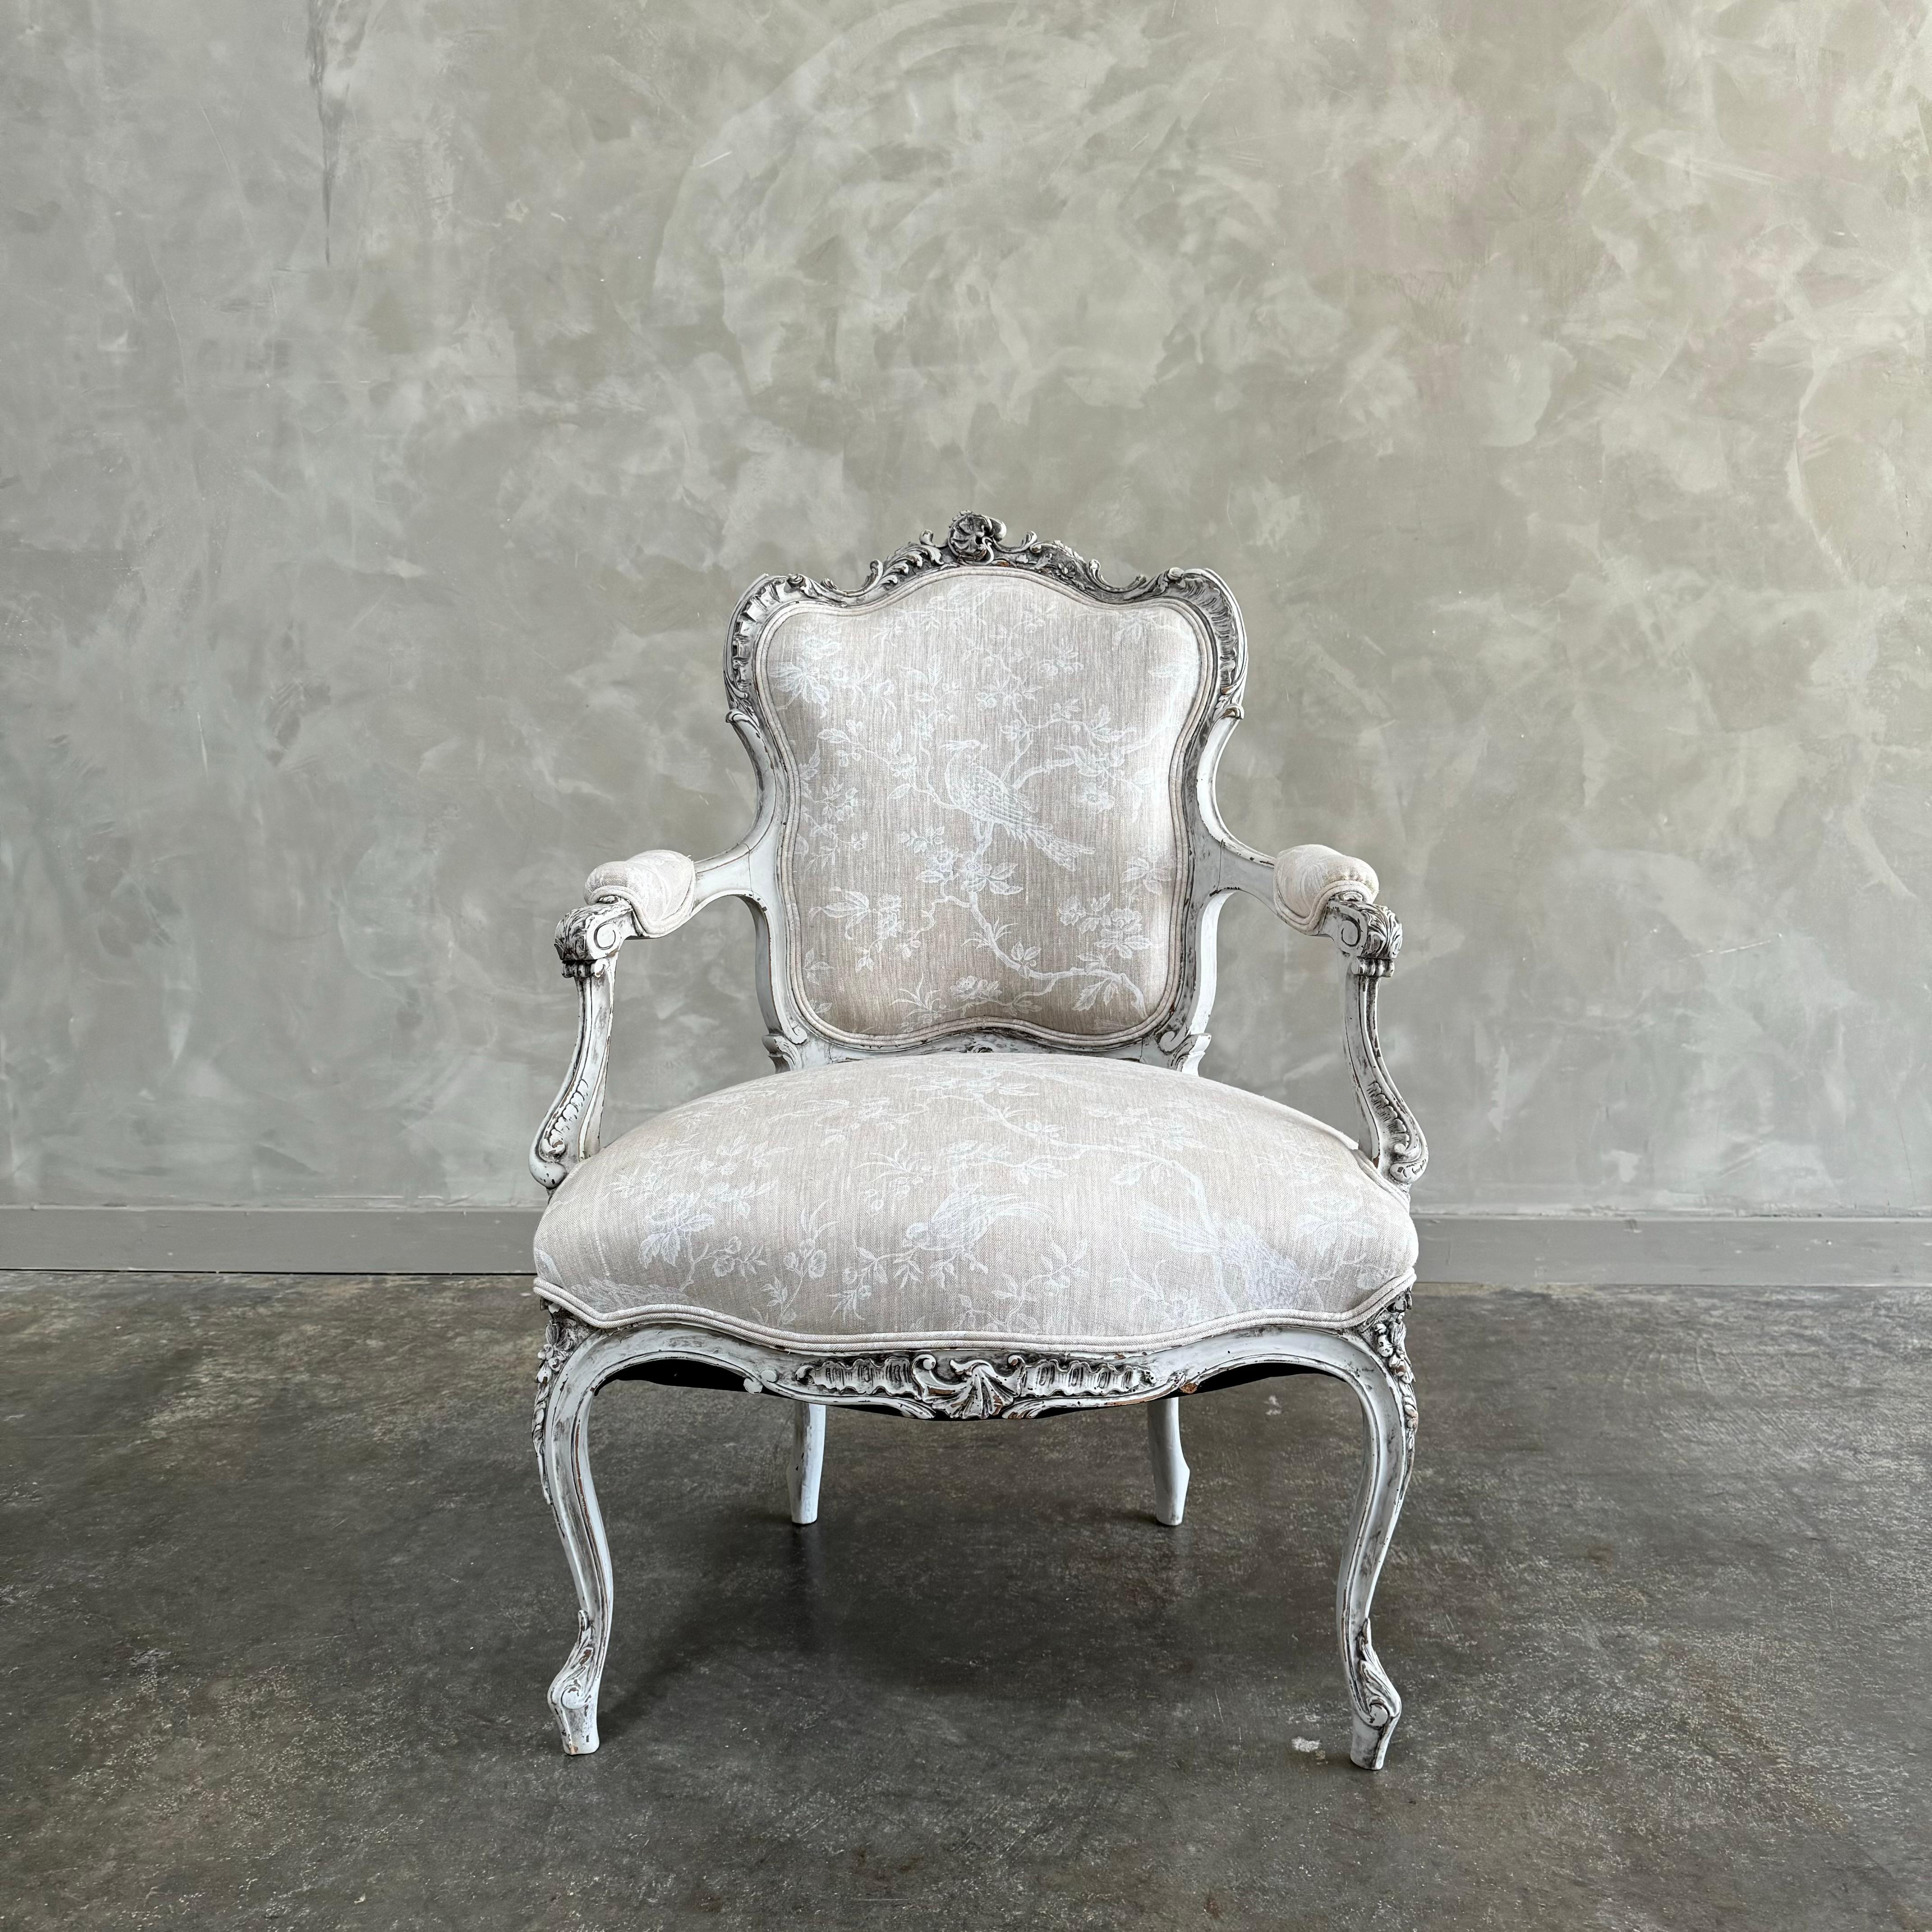 Antique French Louis XV Style chair. painted in a french oyster grey with subtle distress edges, finished with an antique glazed patina. Upholstered seat and back in a beautiful printed linen, solid and sturdy ready for everyday use. 
Dimensions: